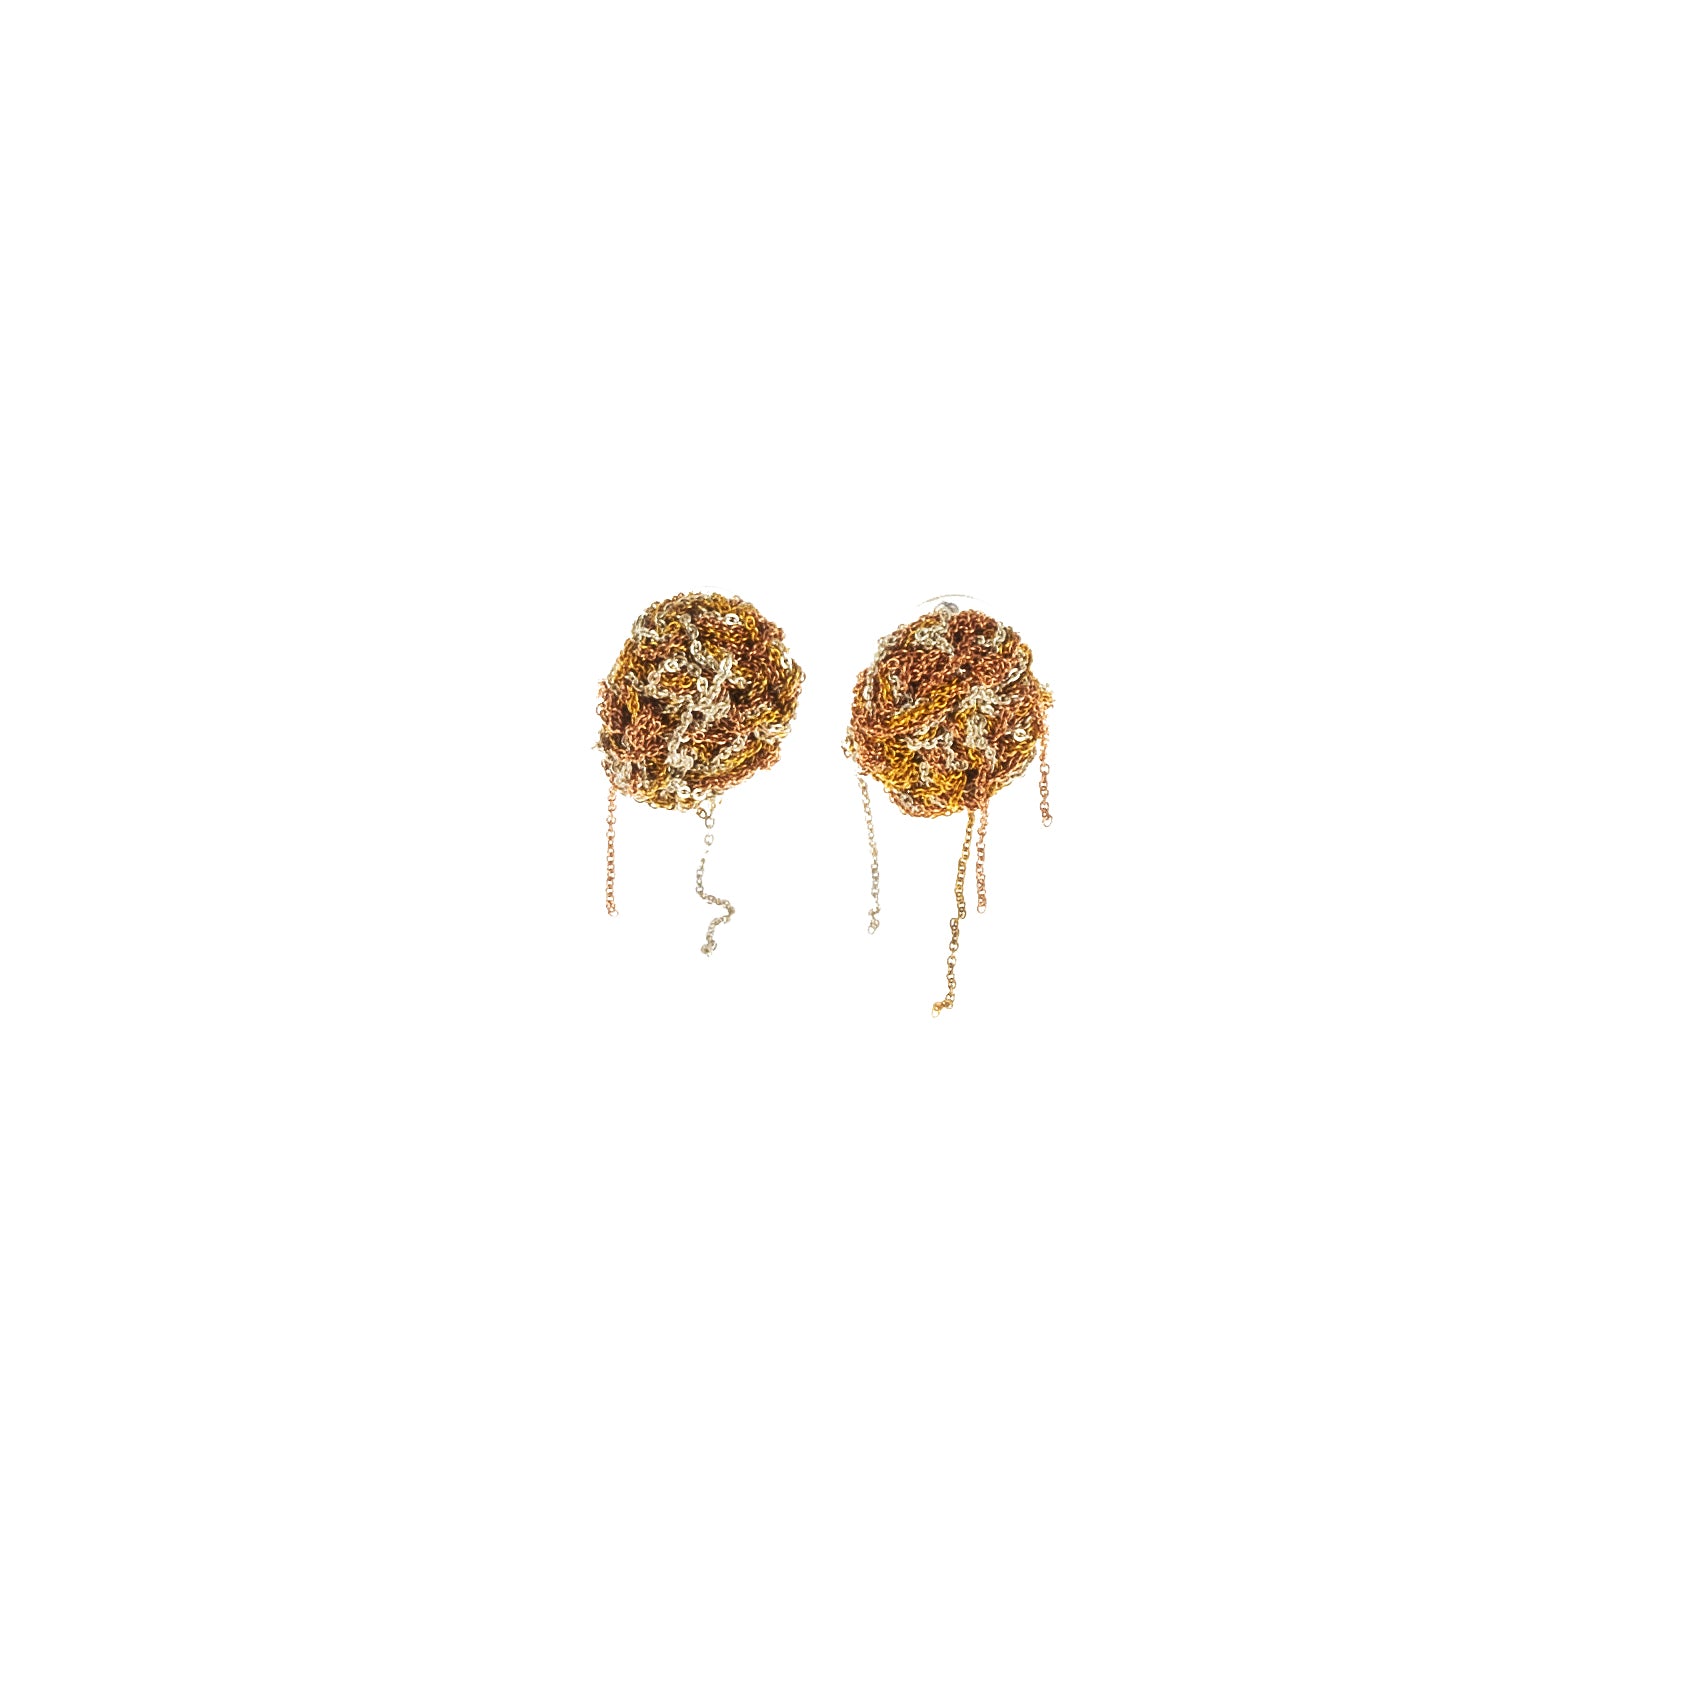 Blended Nugget Earrings in Silver, Gold, and Rose Gold